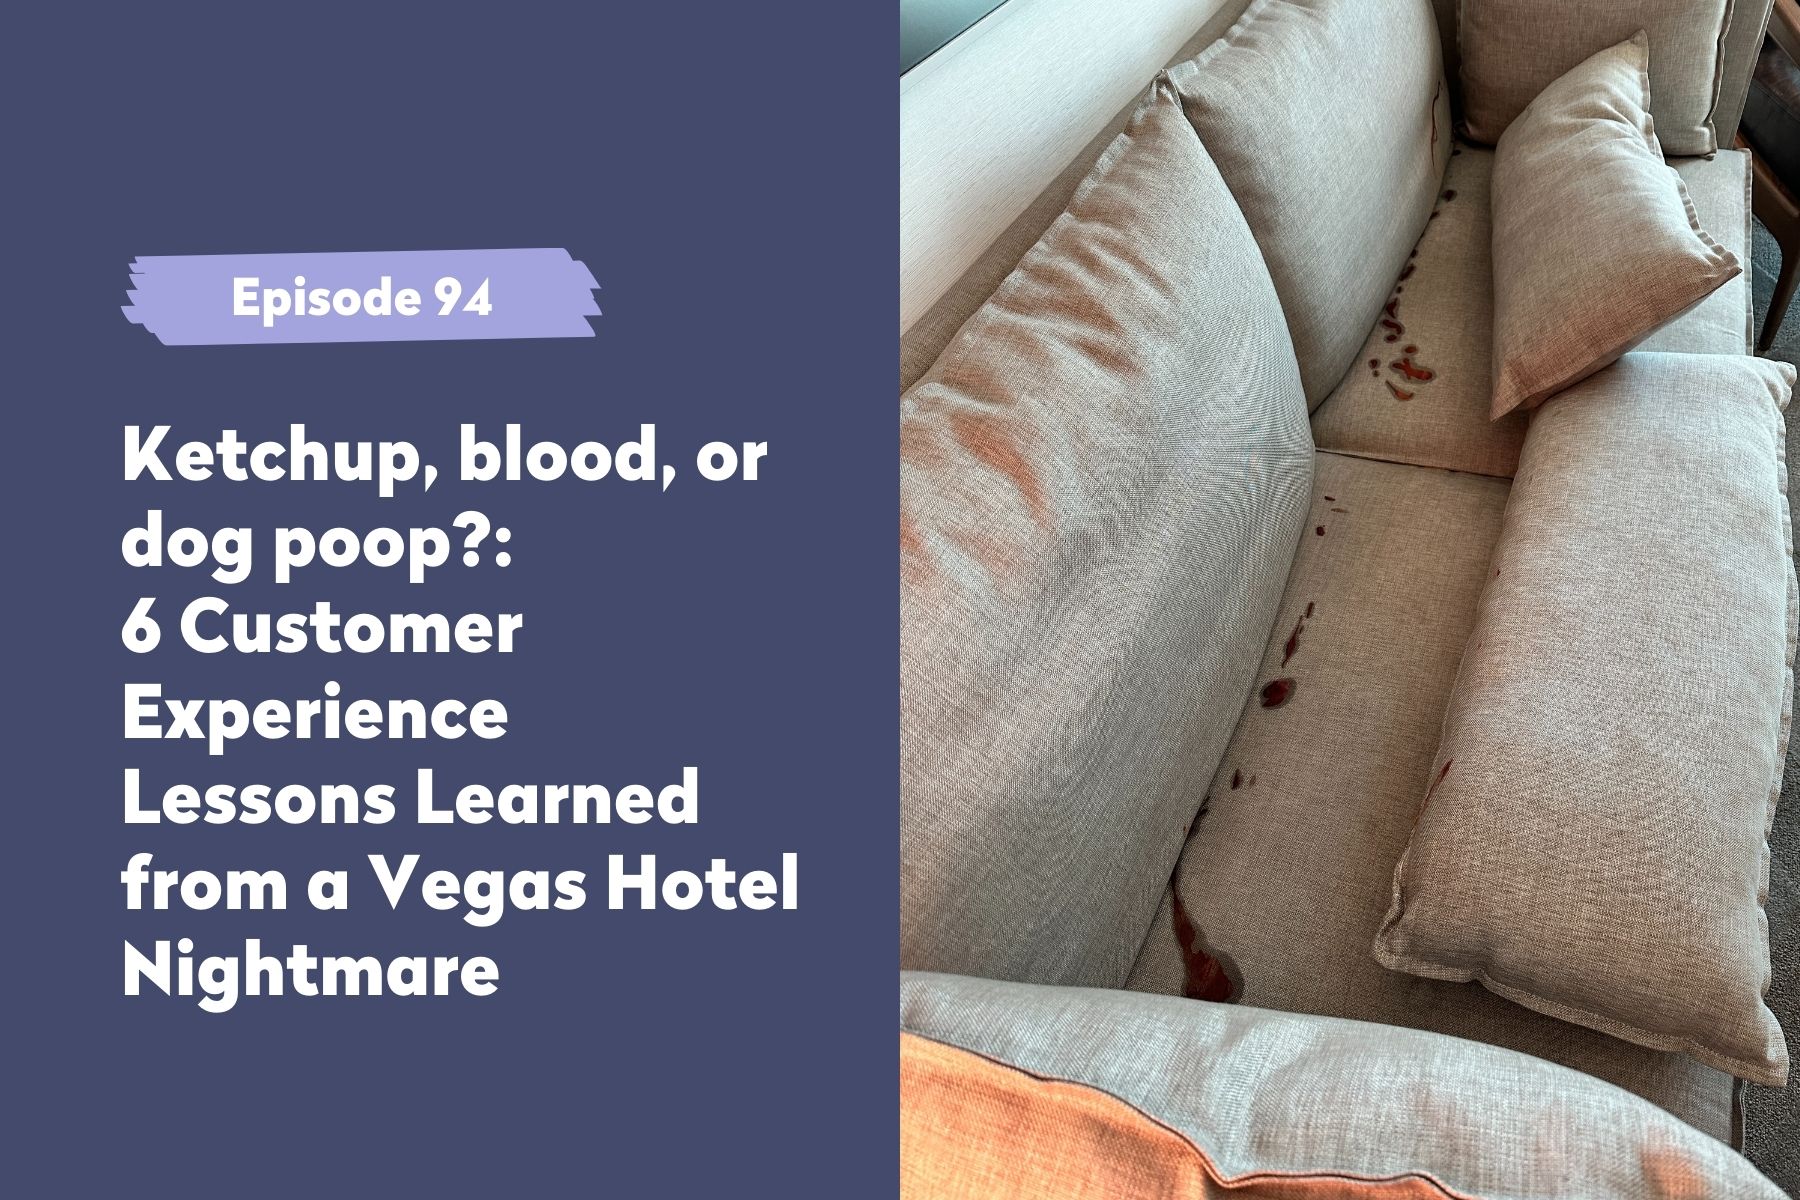 Episode 94 | Ketchup, blood, or dog poop?: 6 Customer Experience Lessons Learned from a Vegas Hotel Nightmare